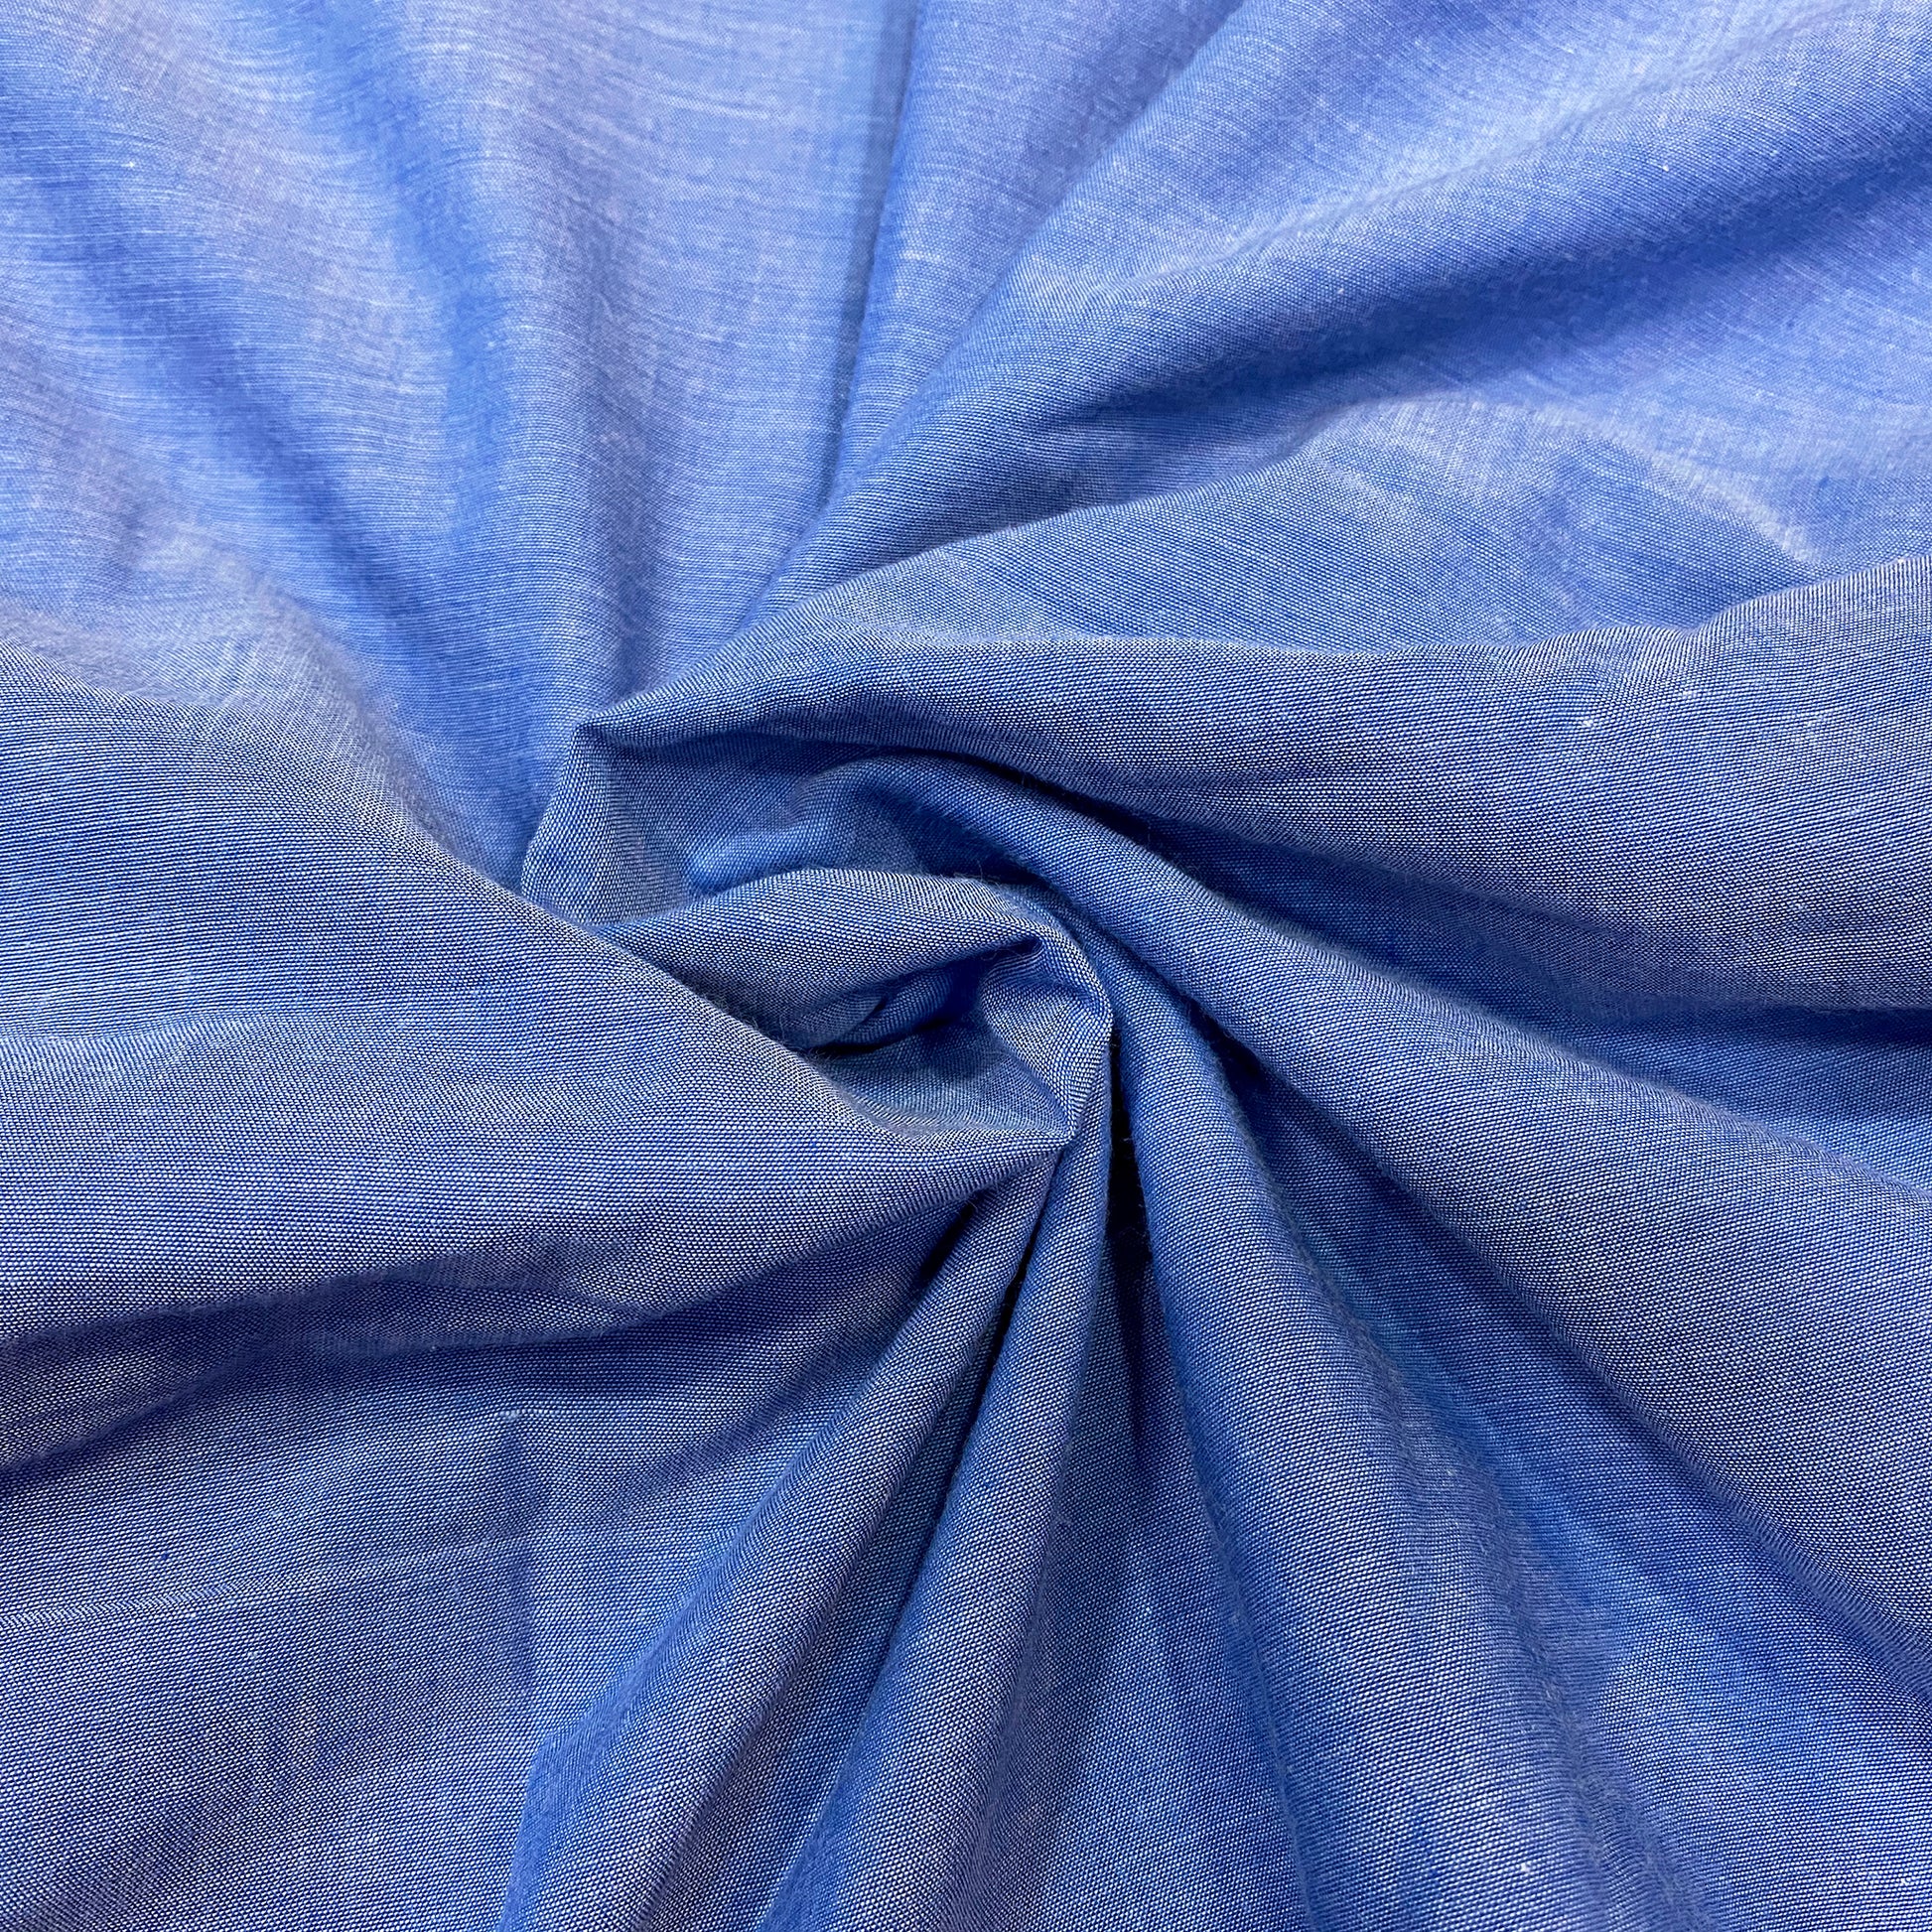 plain-blue-cotton-fabric-for-formal-shirts